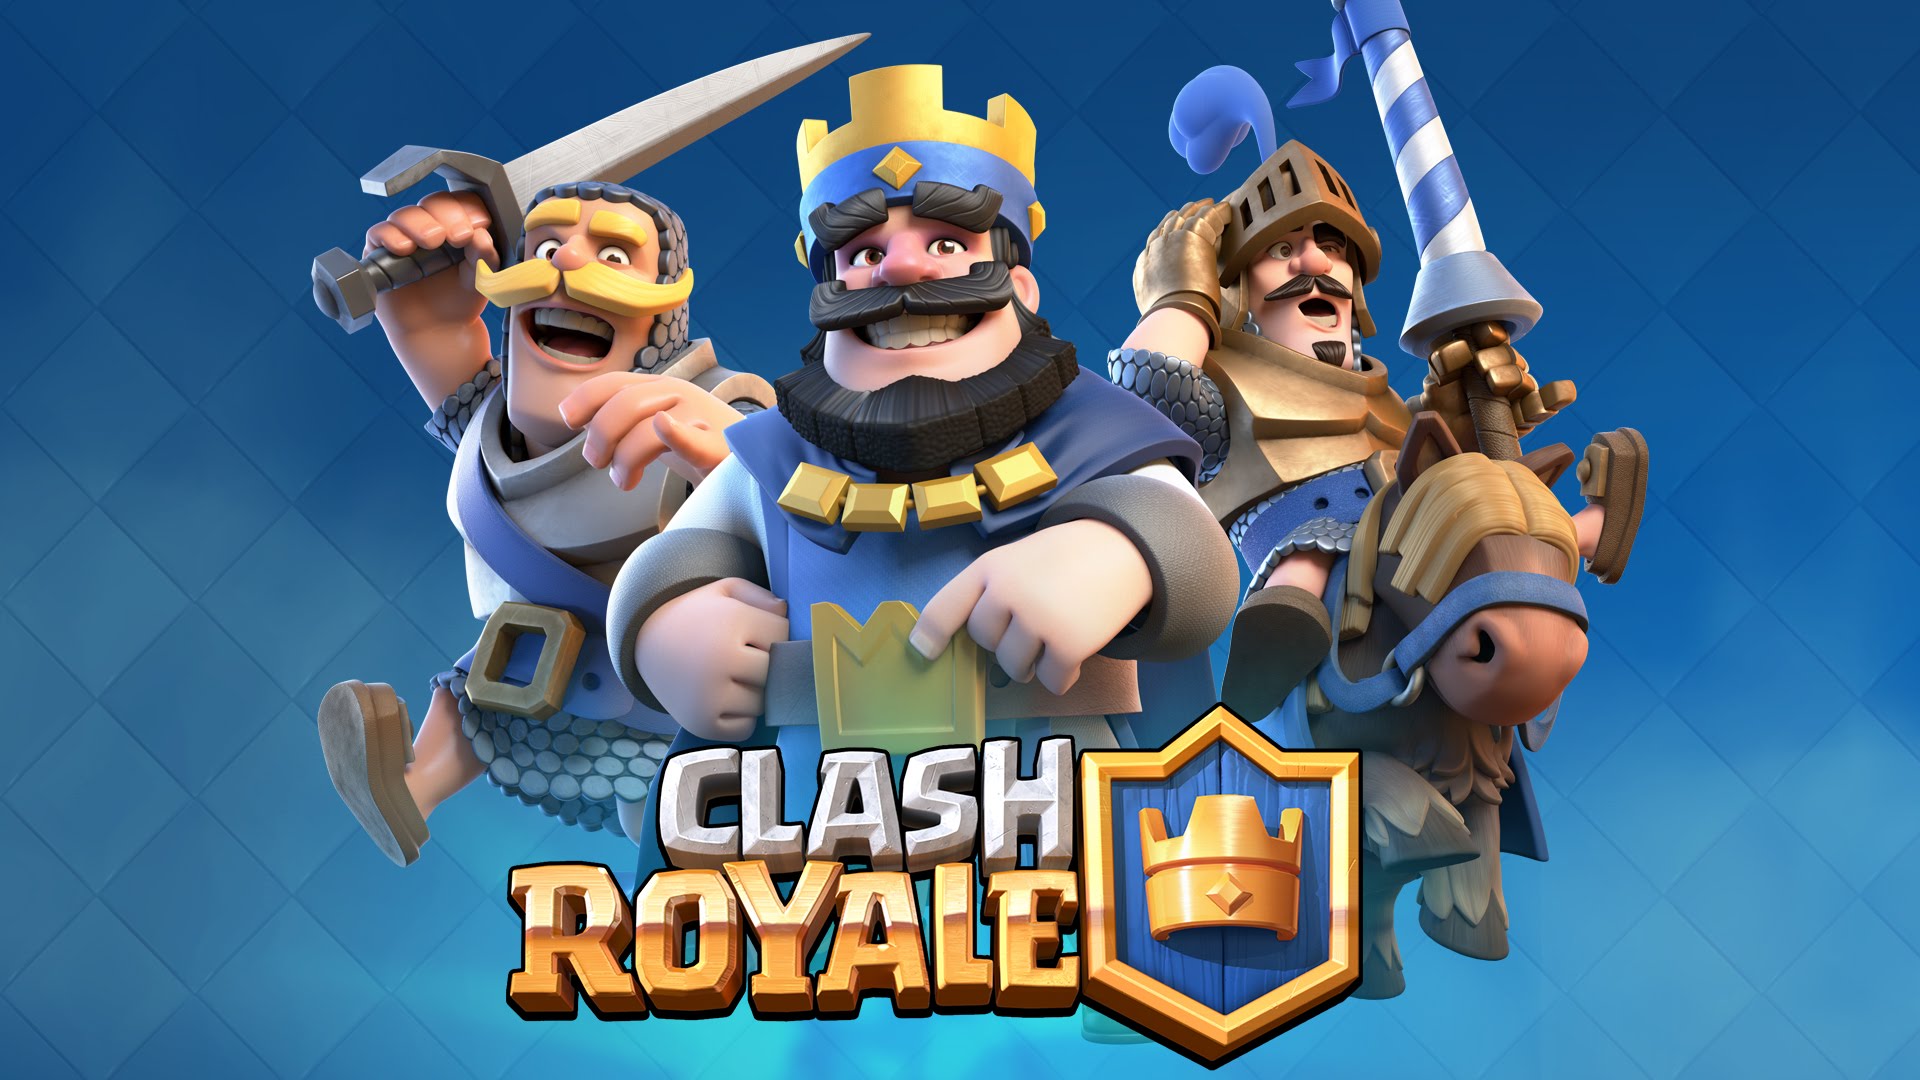 Clash royale png images | PNGWing